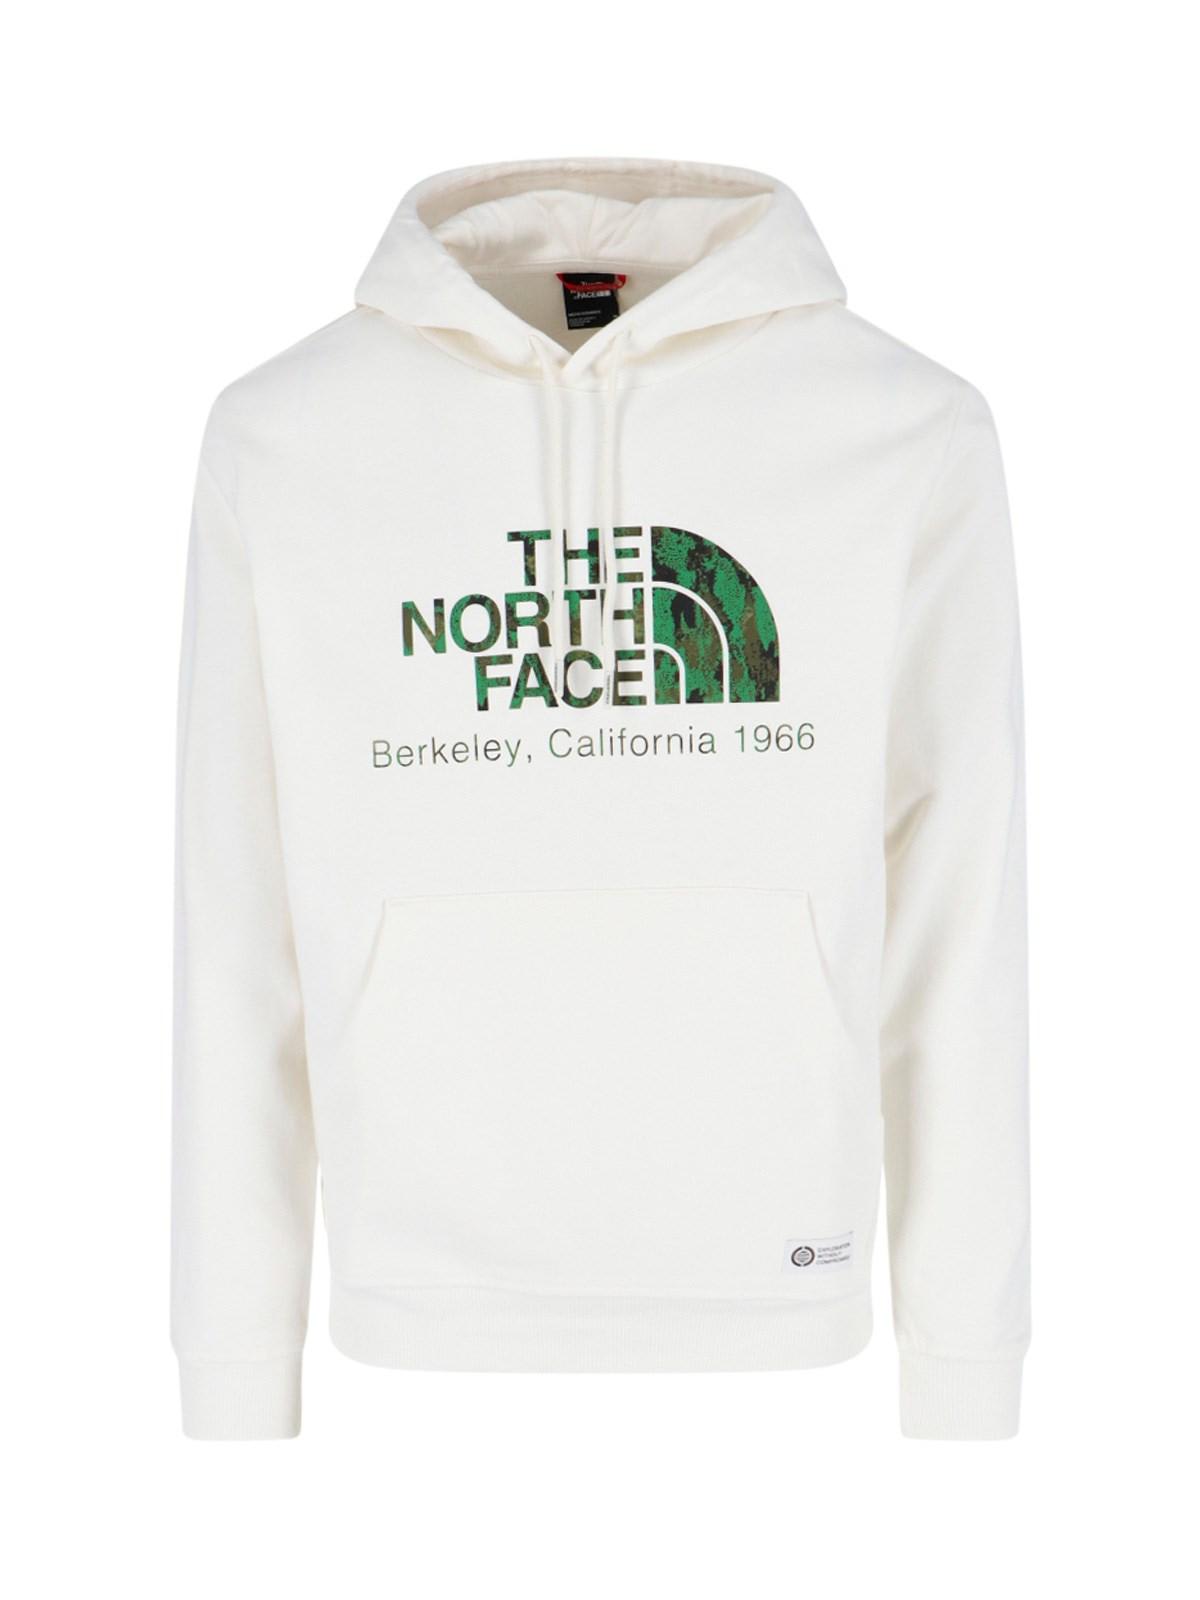 Shop The North Face Berkeley California Hoodie In White